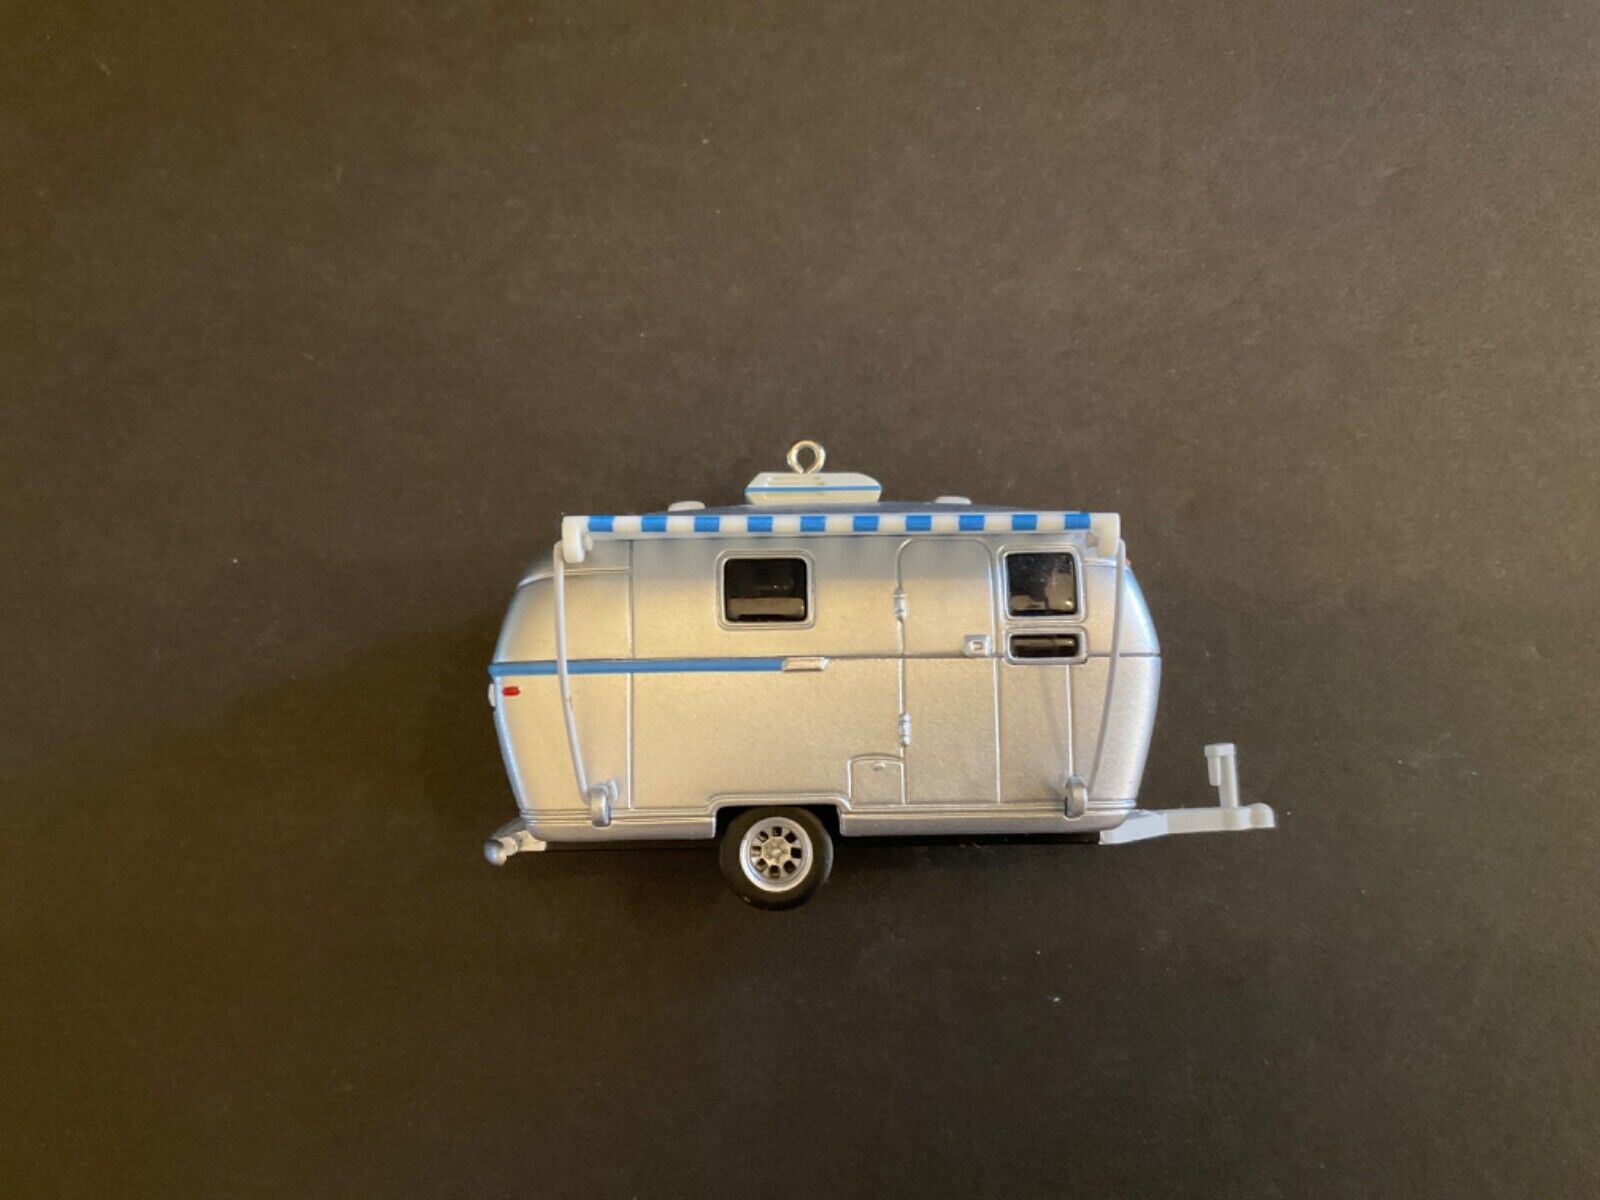 Hallmark 2007 Keepsake Ornament AIRSTREAM Camper Ornament w/ Pull Out Awning